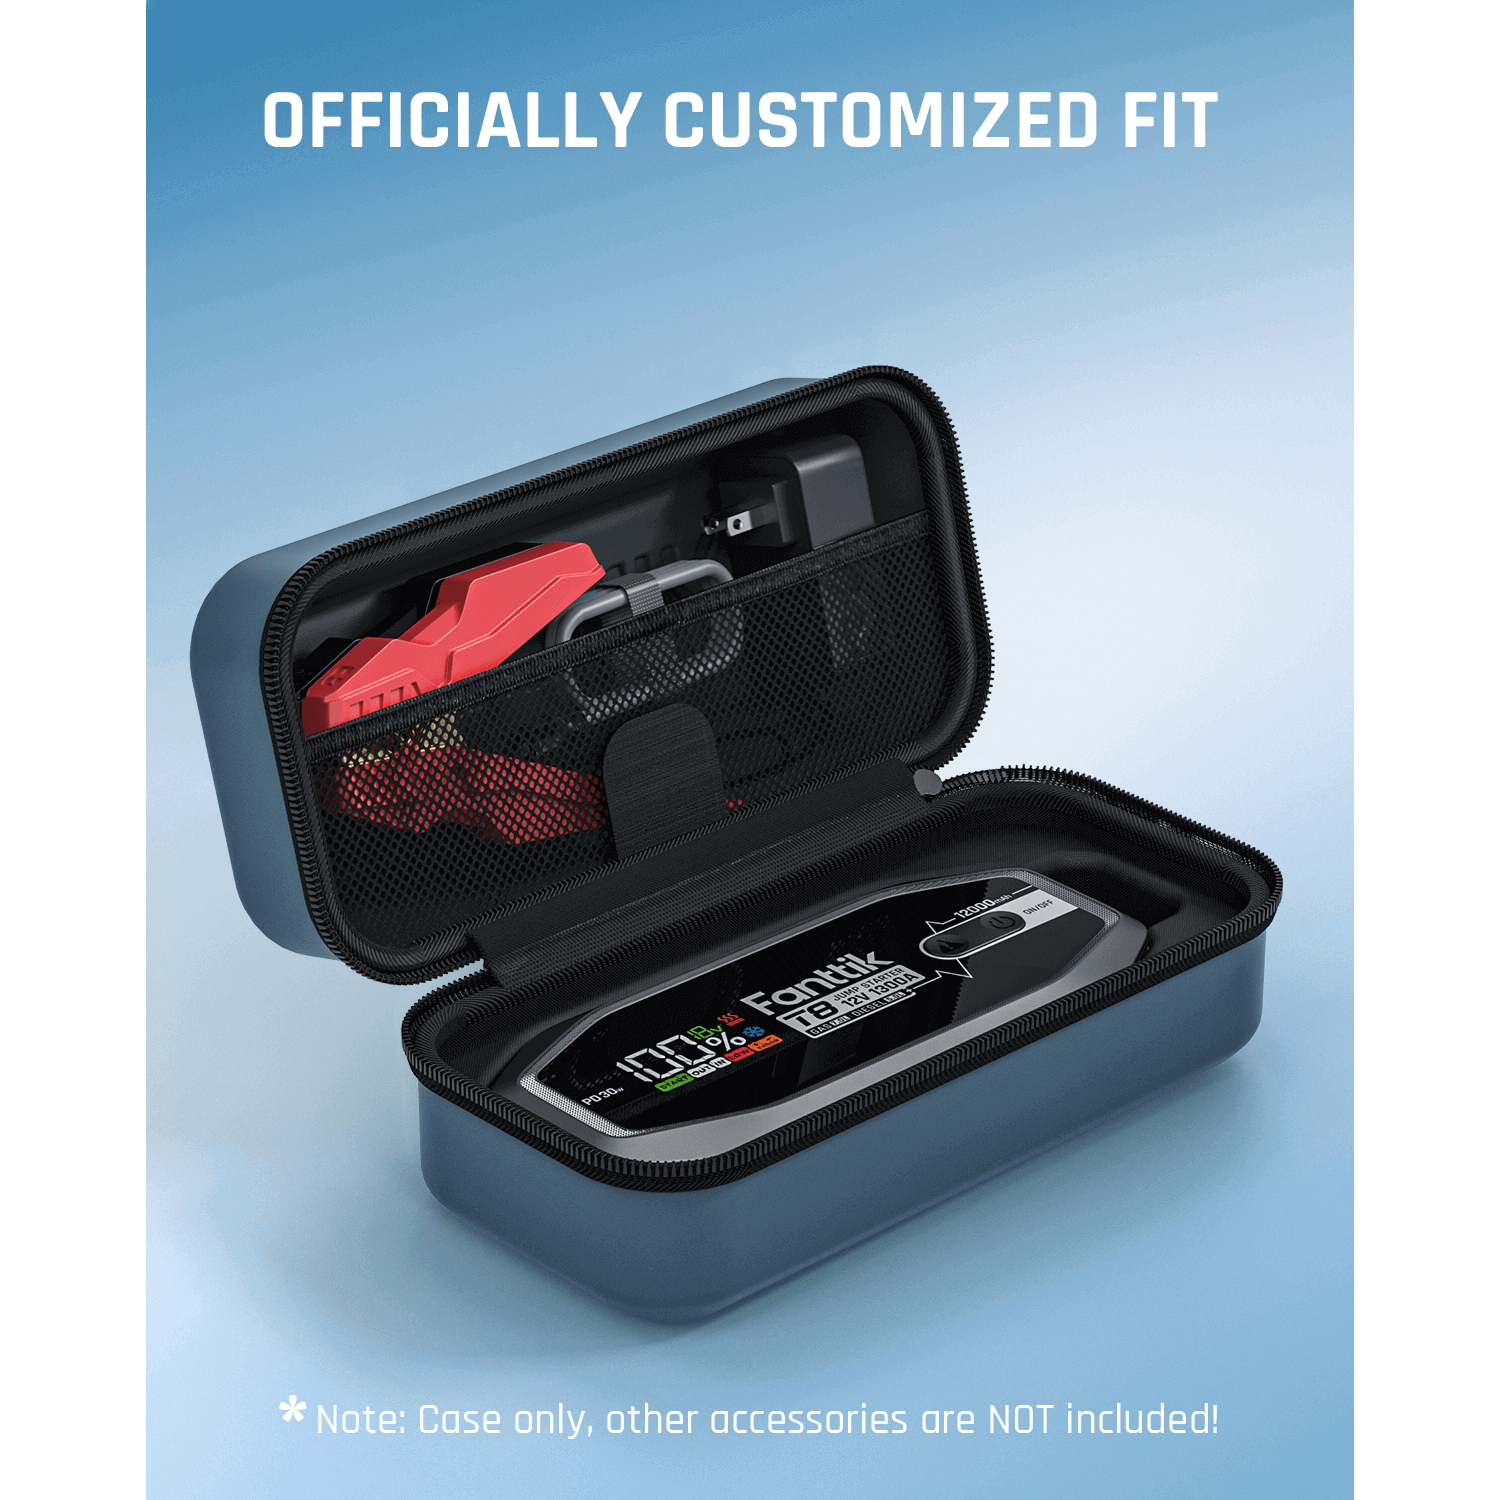 Particularly designed for Fanttik T8 jump starter, this car battery pack storage case is dedicated to protecting your T8 jump starter and other related accessories.